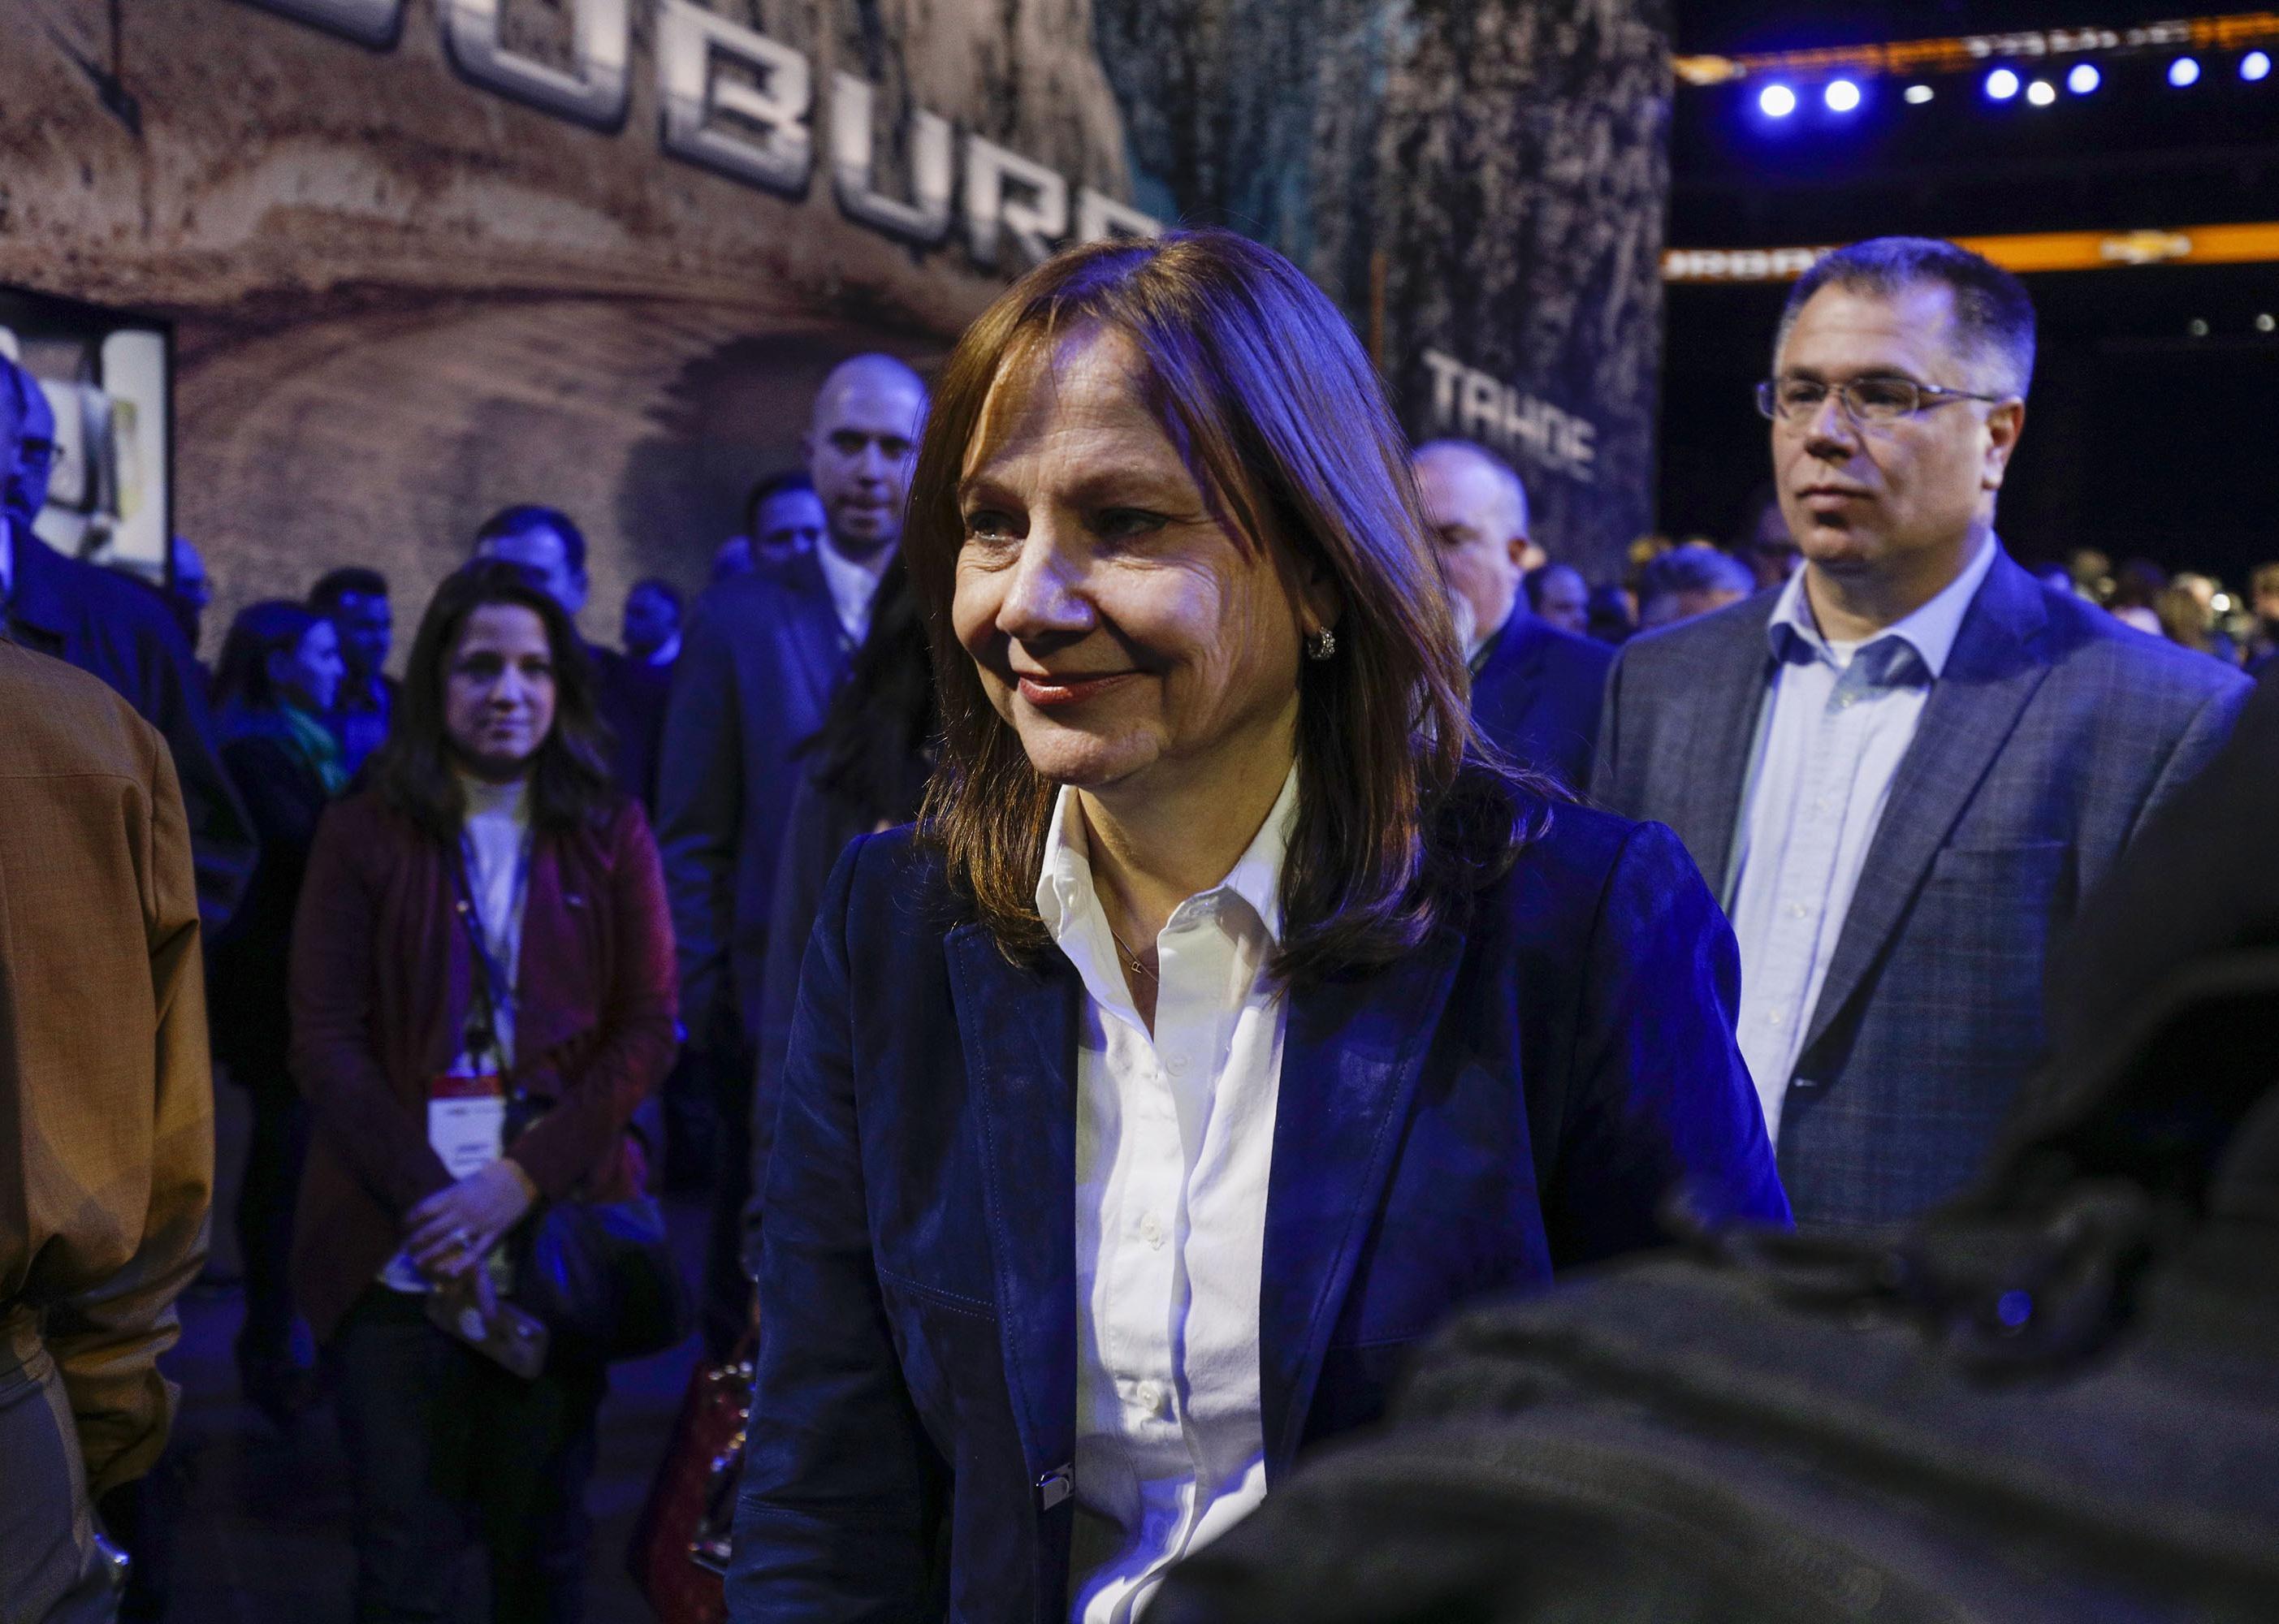 Mary Barra smiling and walking through a crowd.